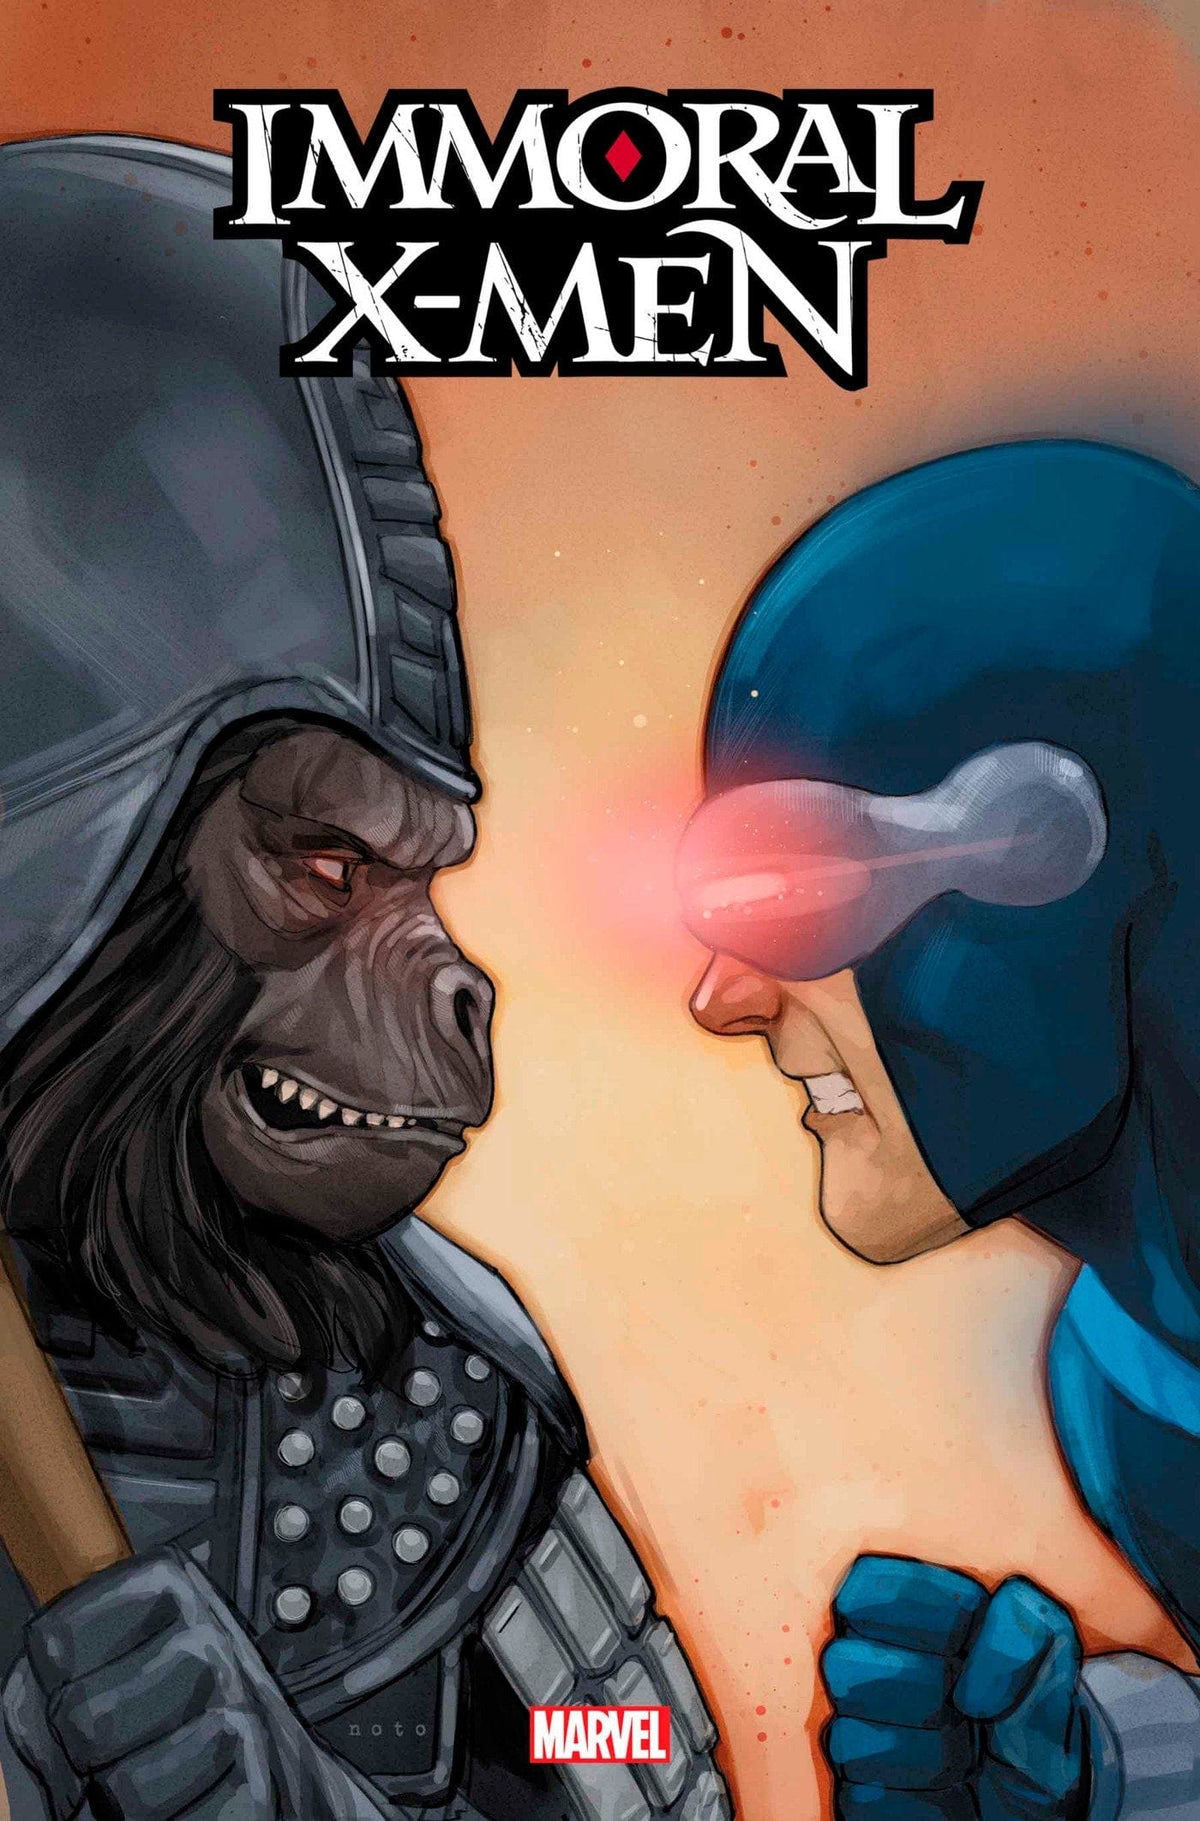 IMMORAL X-MEN #1 (OF 3) NOTO PLANET OF THE APES VAR - Third Eye